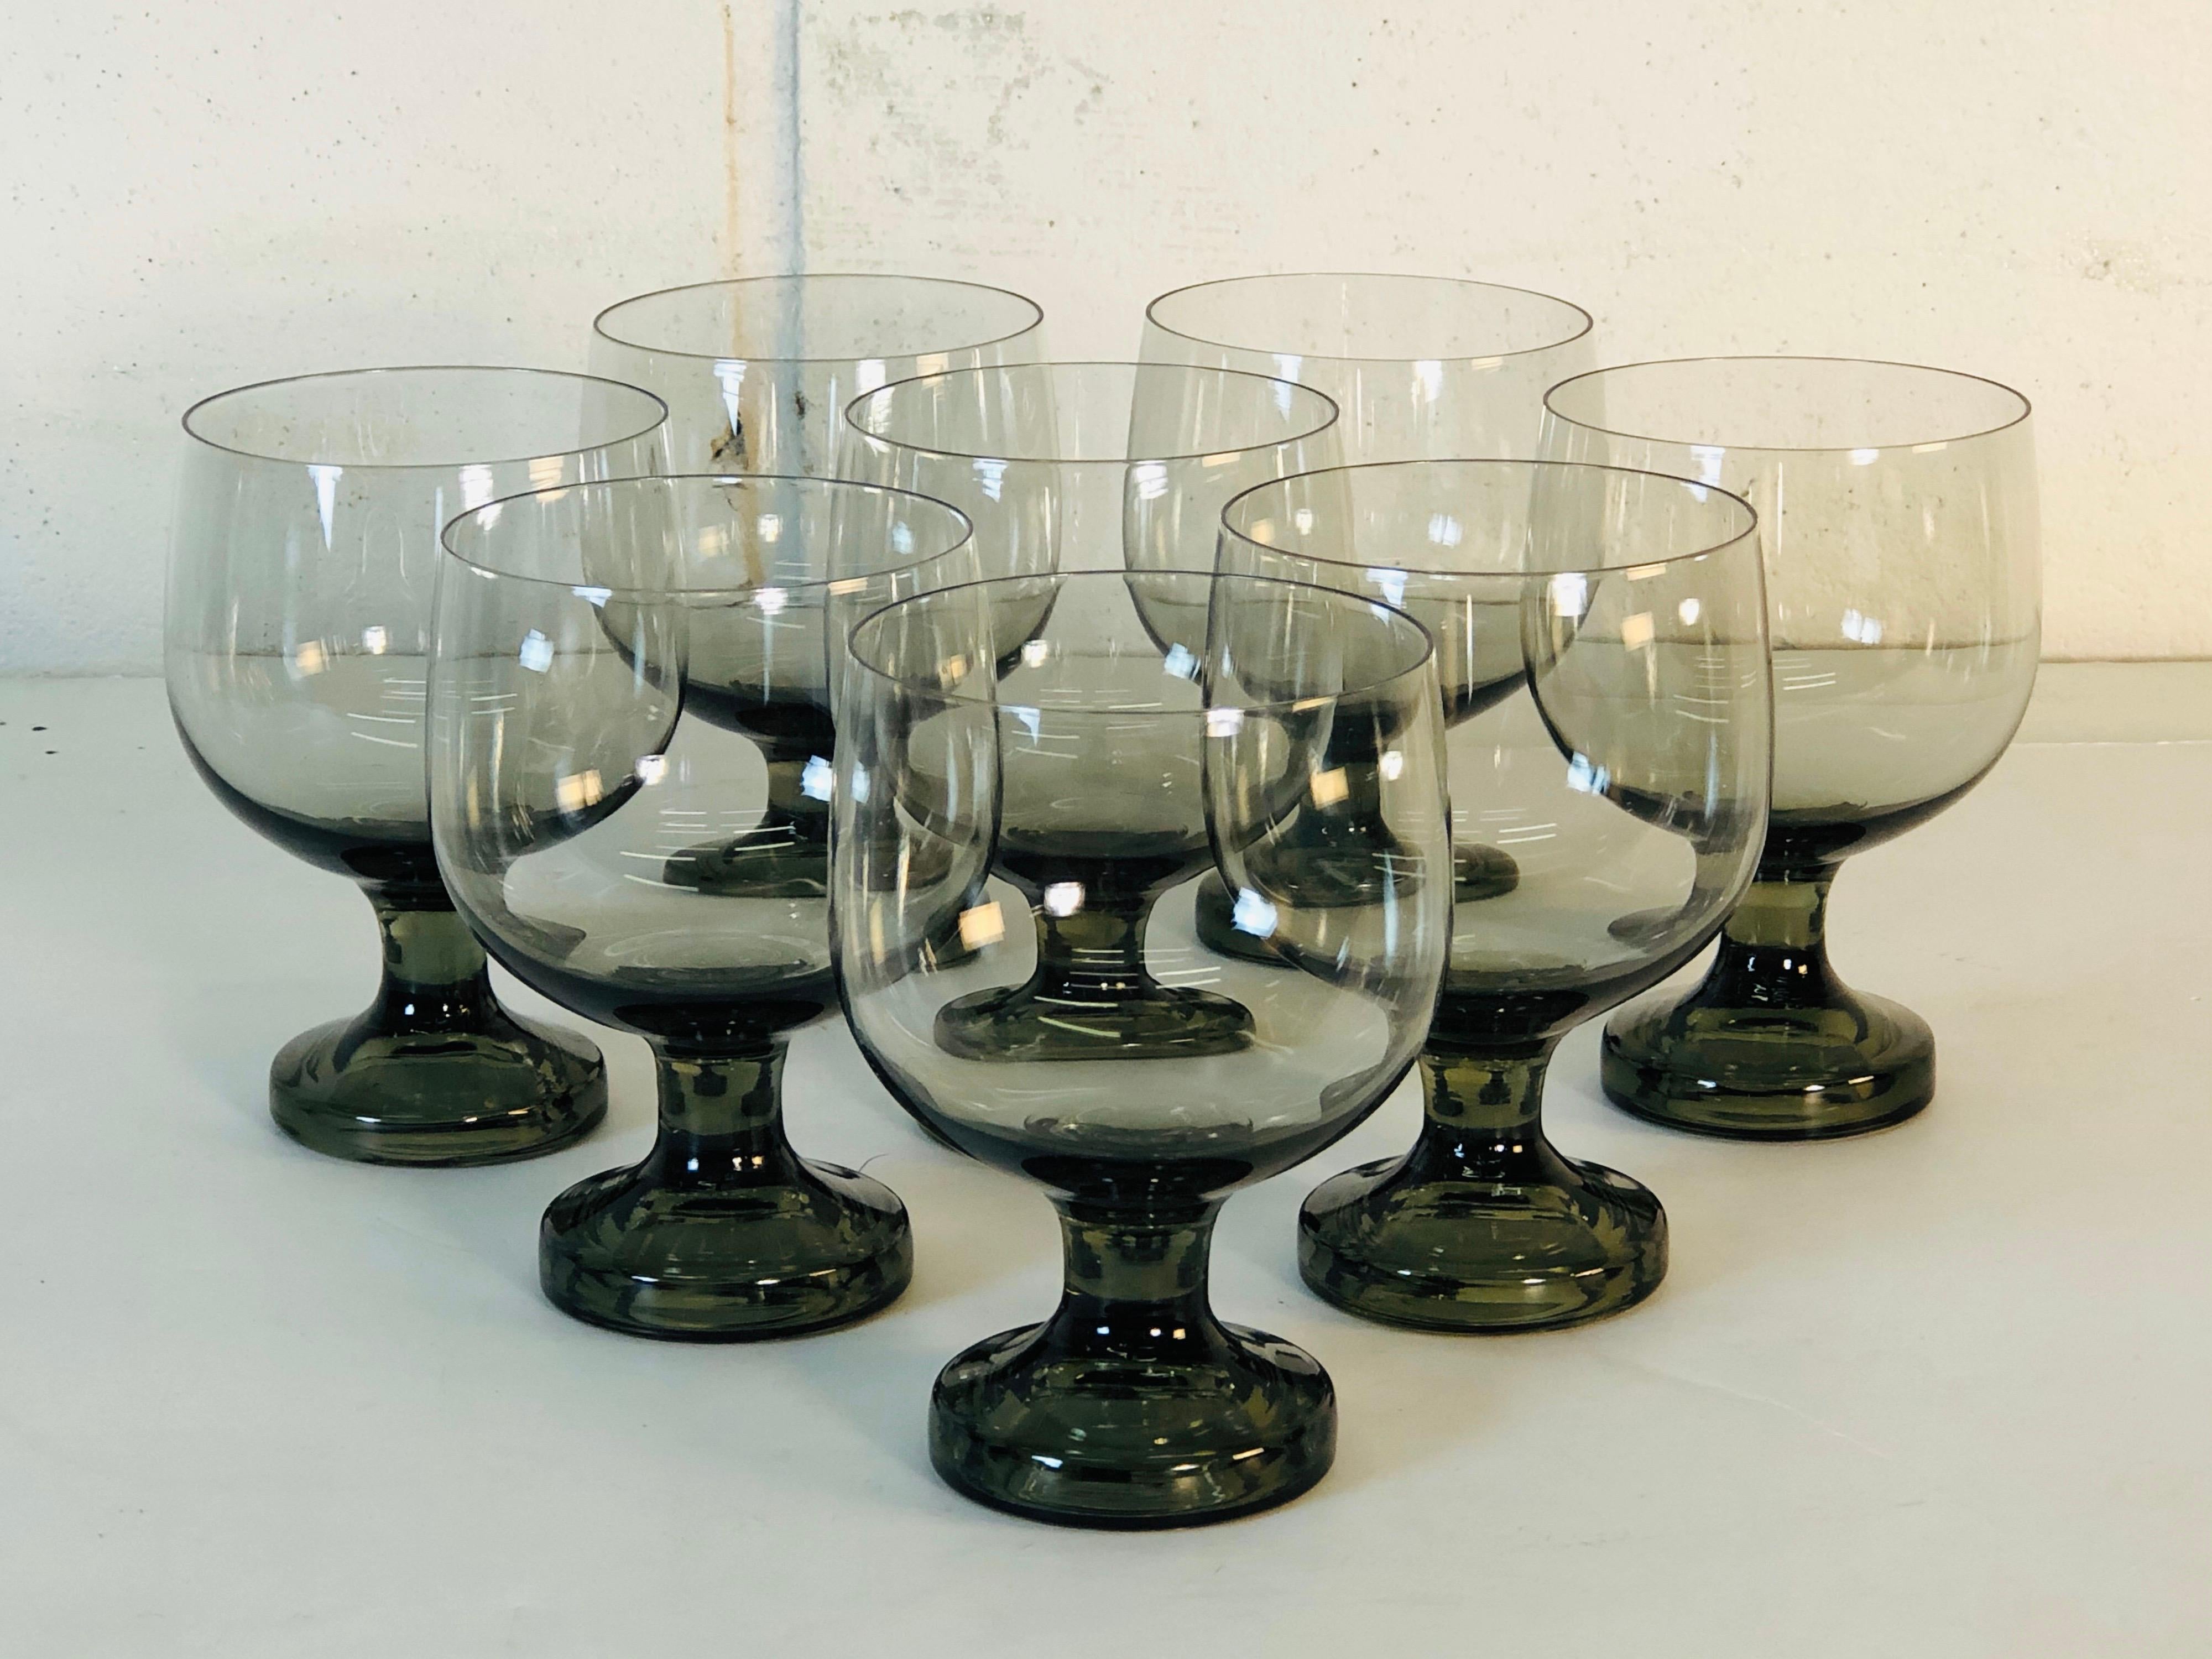 Vintage 1960s set of eight smoked glass goblets attributed to Orrefors glass. Solid base that graduates up to a delicate bowl. No marks.